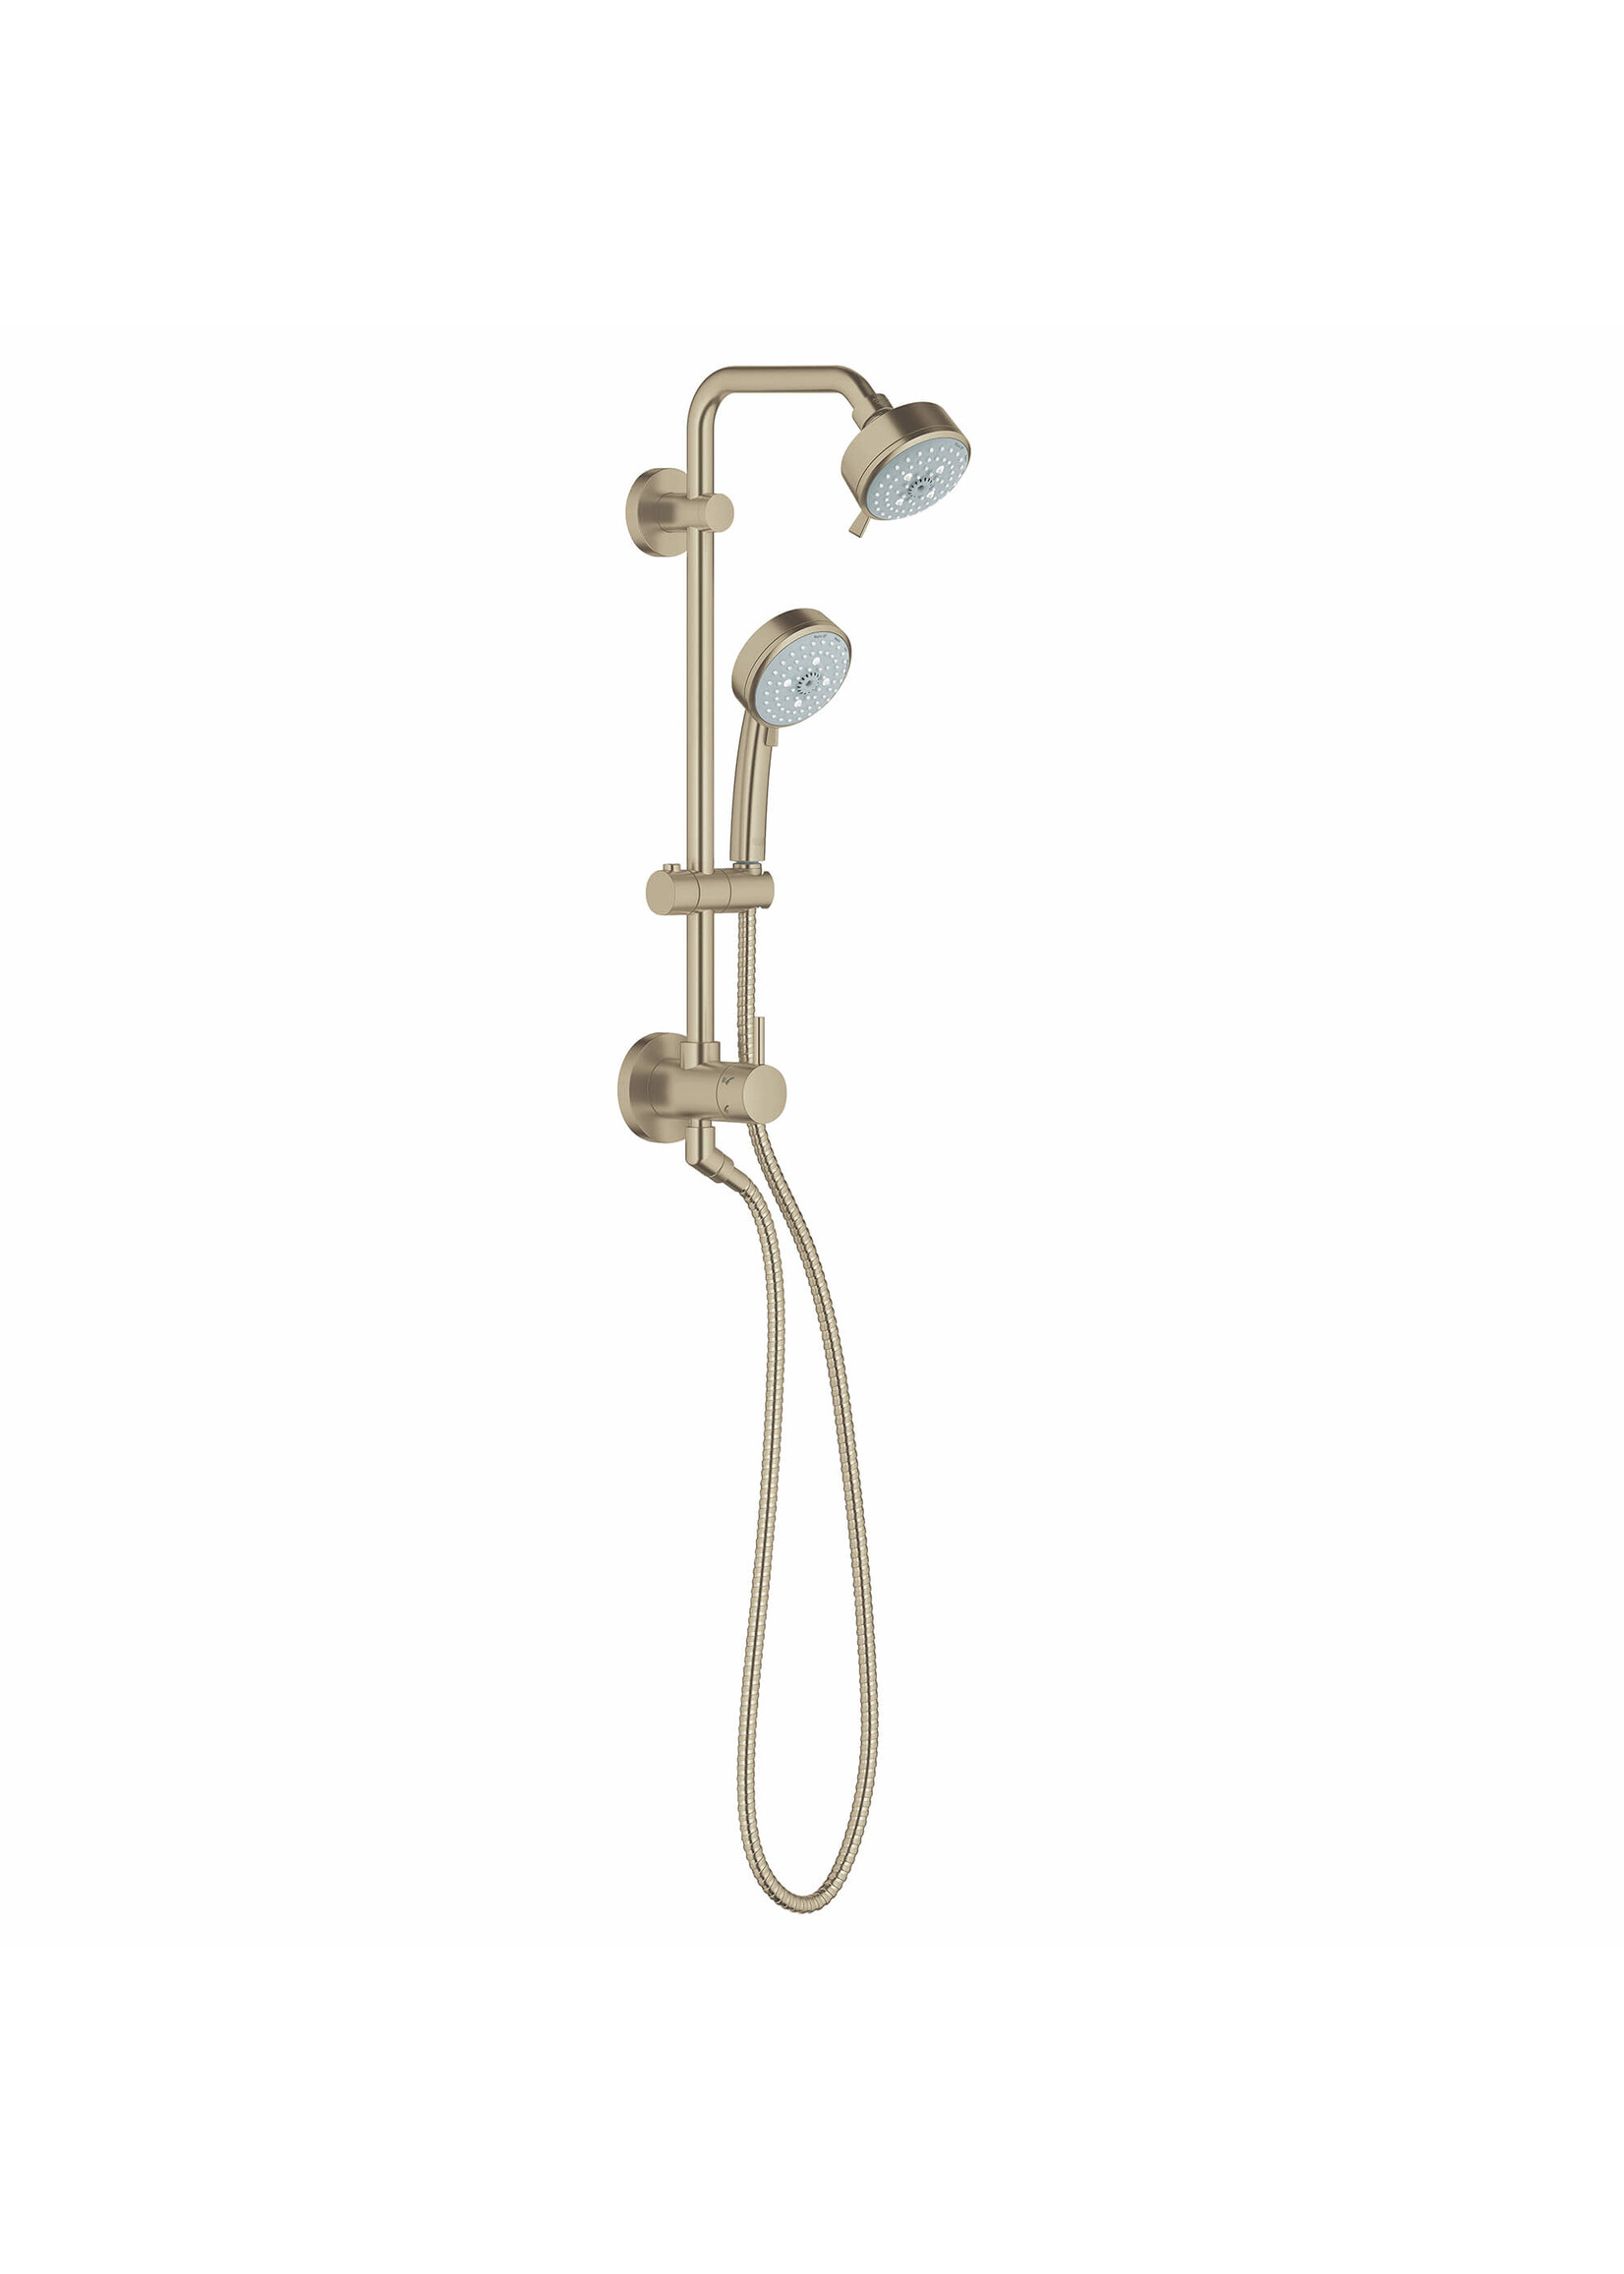 Grohe Grohe Retro-fit™ 18'' Shower System,12 3 ⁄16'' Arm Bru. Nickel